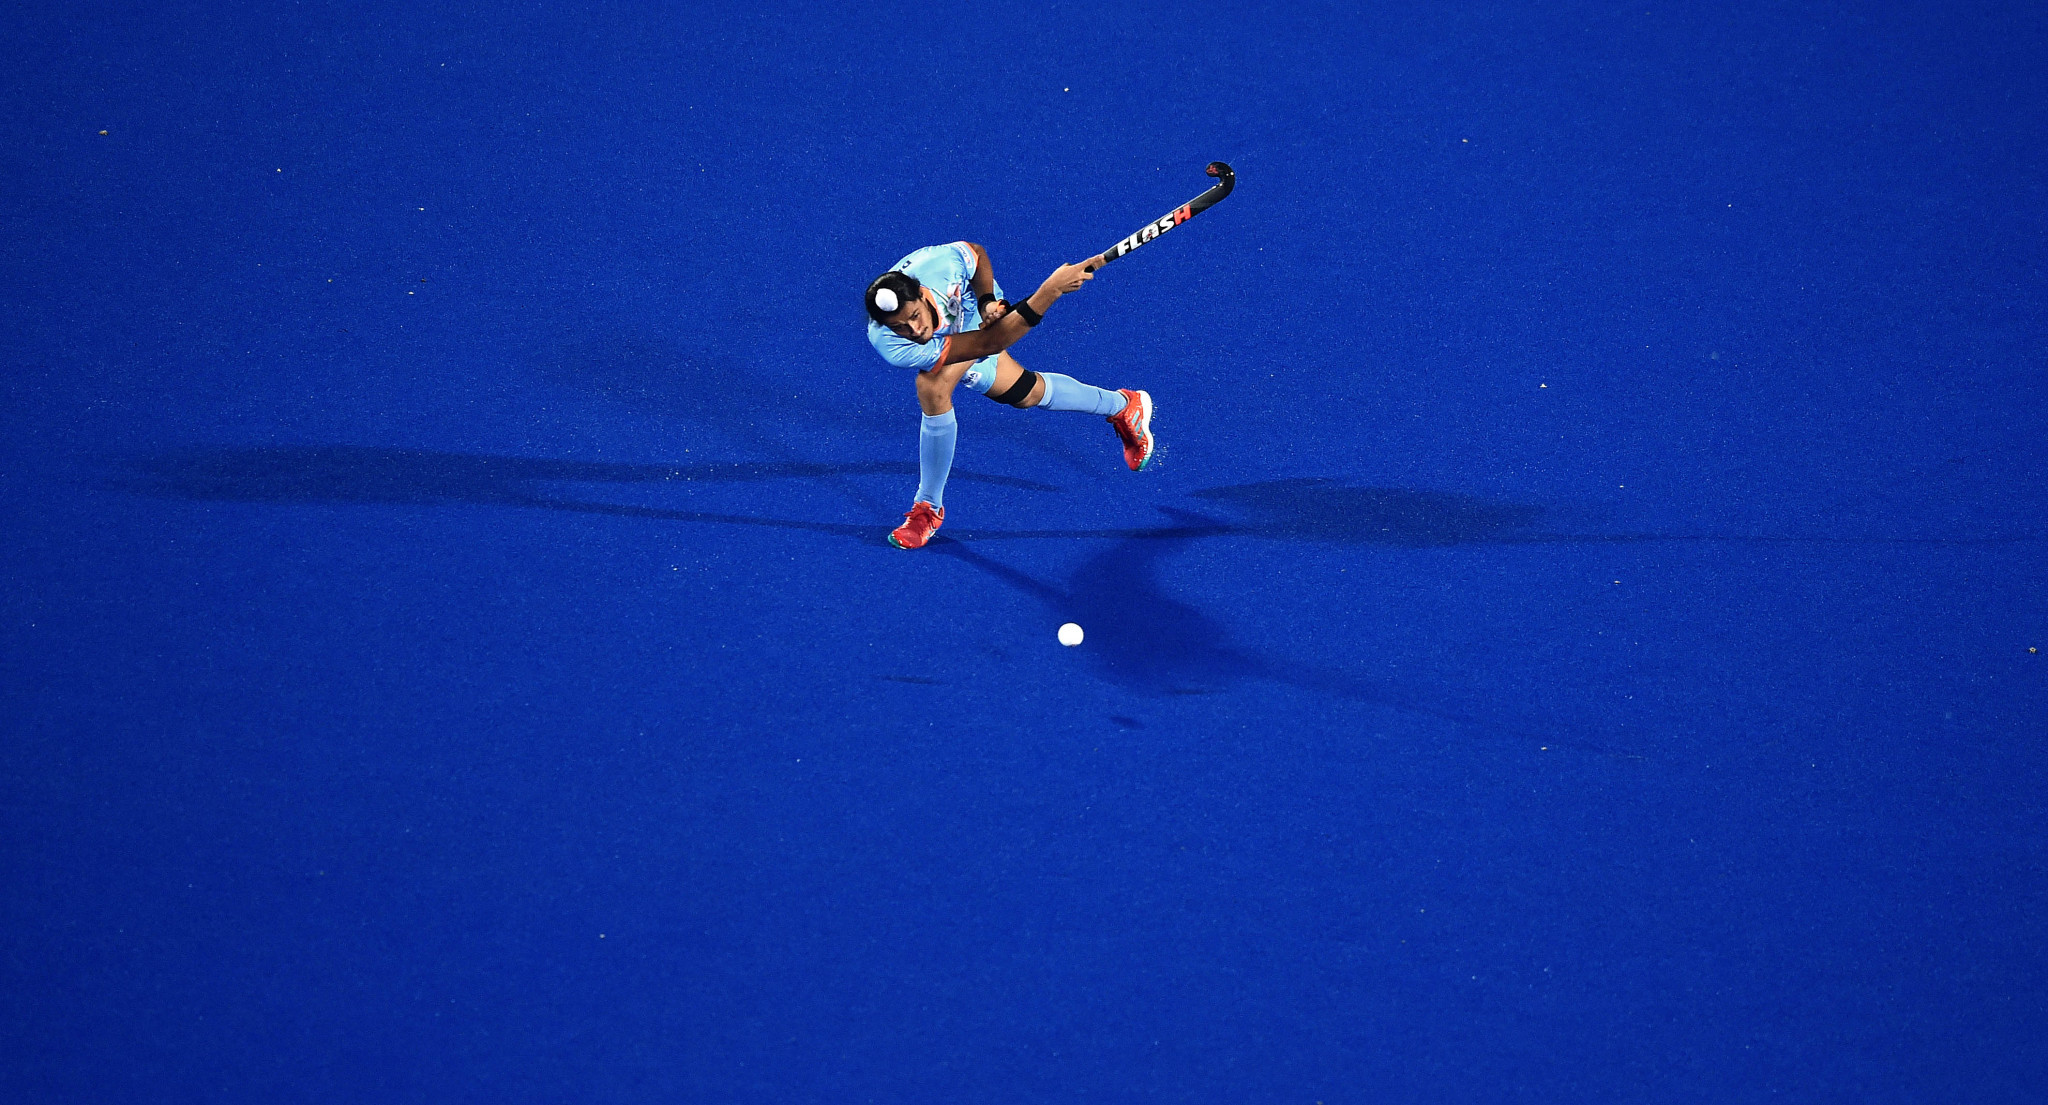 Countries from four continents have submitted bids to the International Hockey Federation to host World Cups in 2026 ©Getty Images